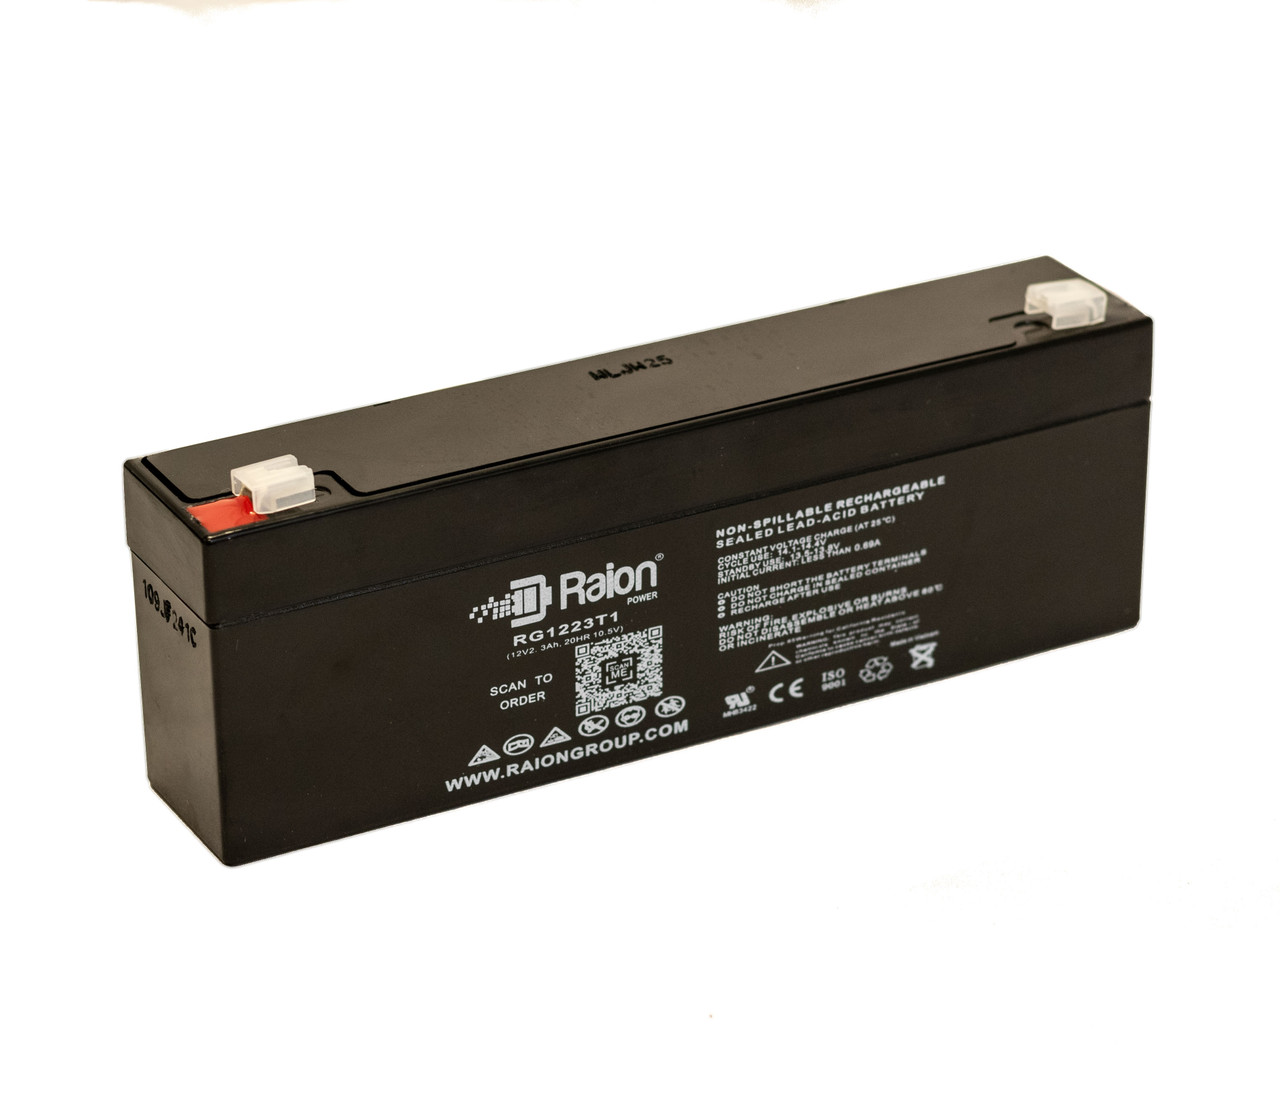 Raion Power RG1223T1 Replacement Battery for Avi 880 Pump